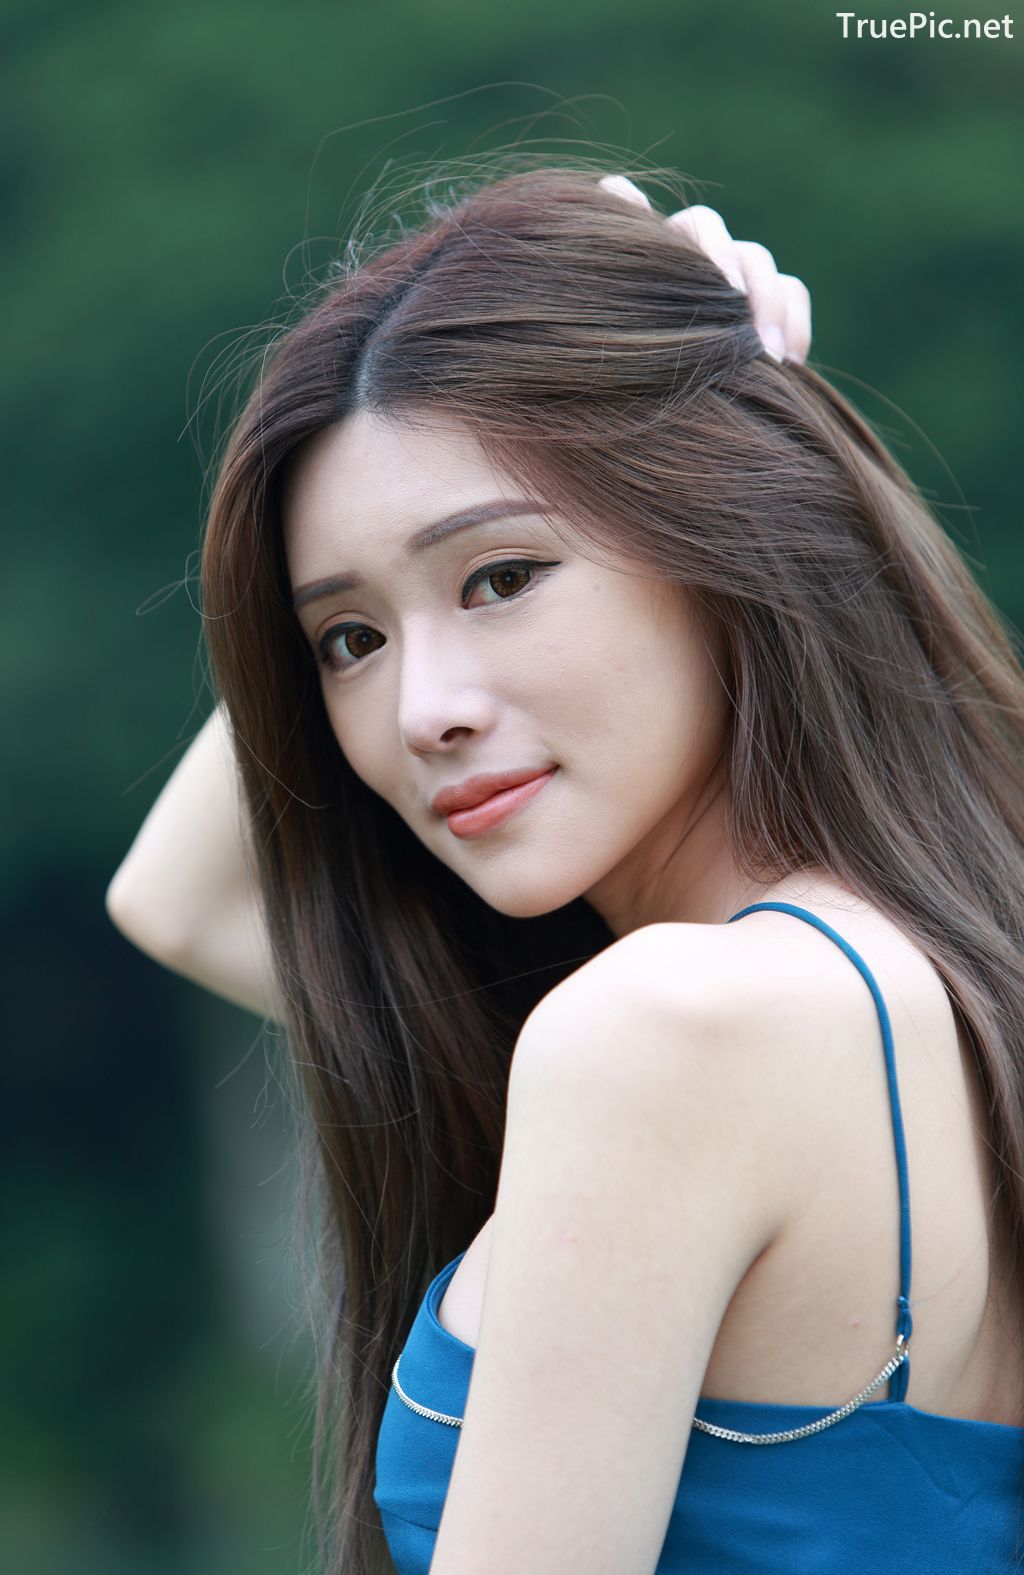 Image-Taiwanese-Pure-Girl-承容-Young-Beautiful-And-Lovely-TruePic.net- Picture-35